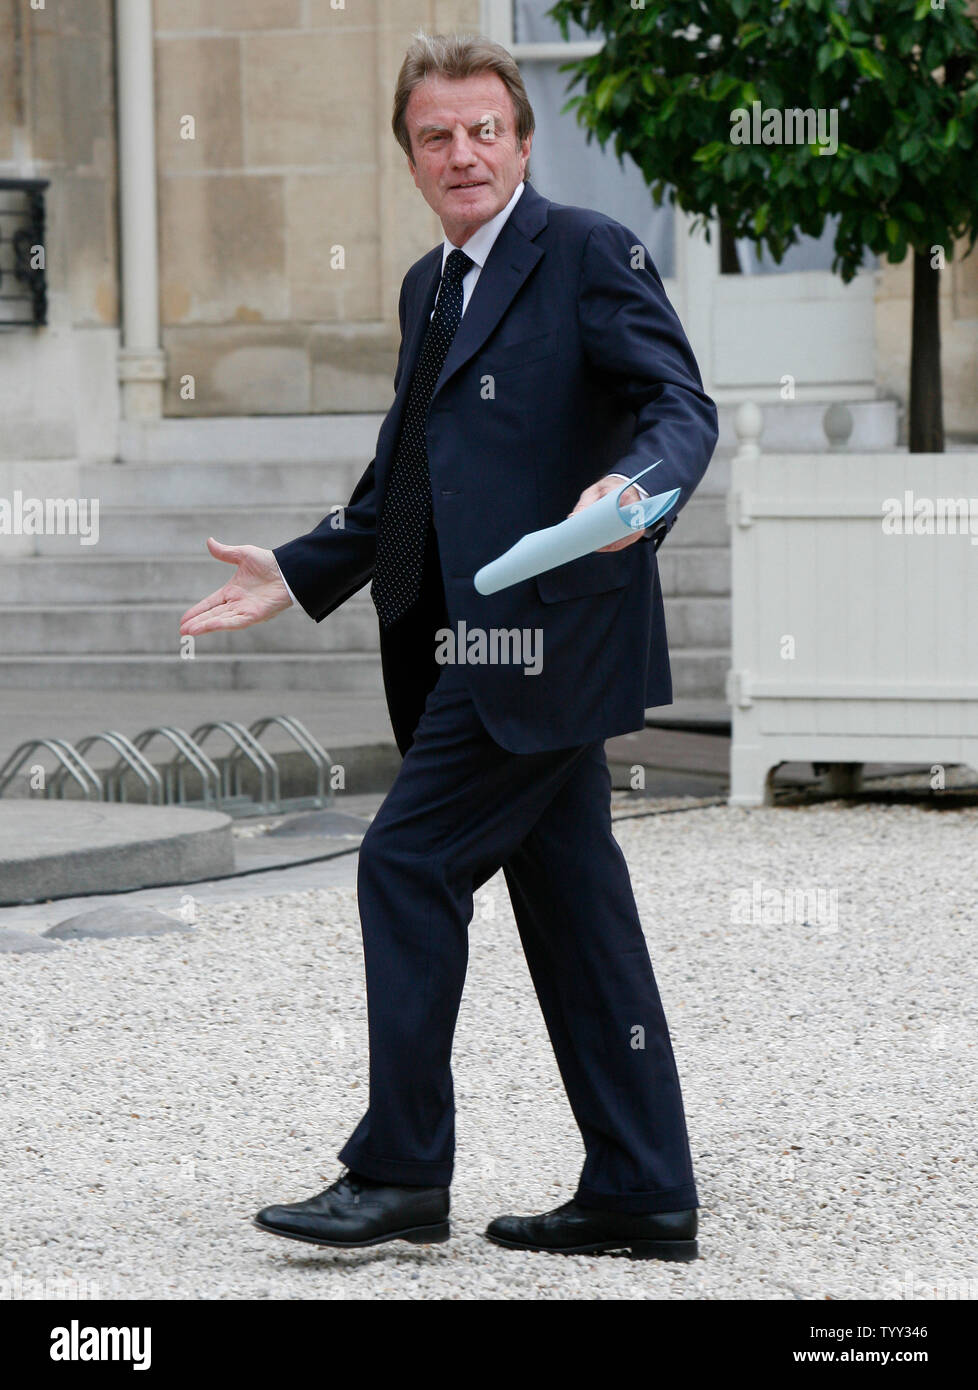 French Minister of Foreign Affaires Bernard Kouchner arrives at the Elysee Palace before a joint press conference by U.S. Democratic presidential candidate Senator Barack Obama and French President Nicolas Sarkozy in Paris on July 25, 2008.    (UPI Photo/ David Silpa) Stock Photo